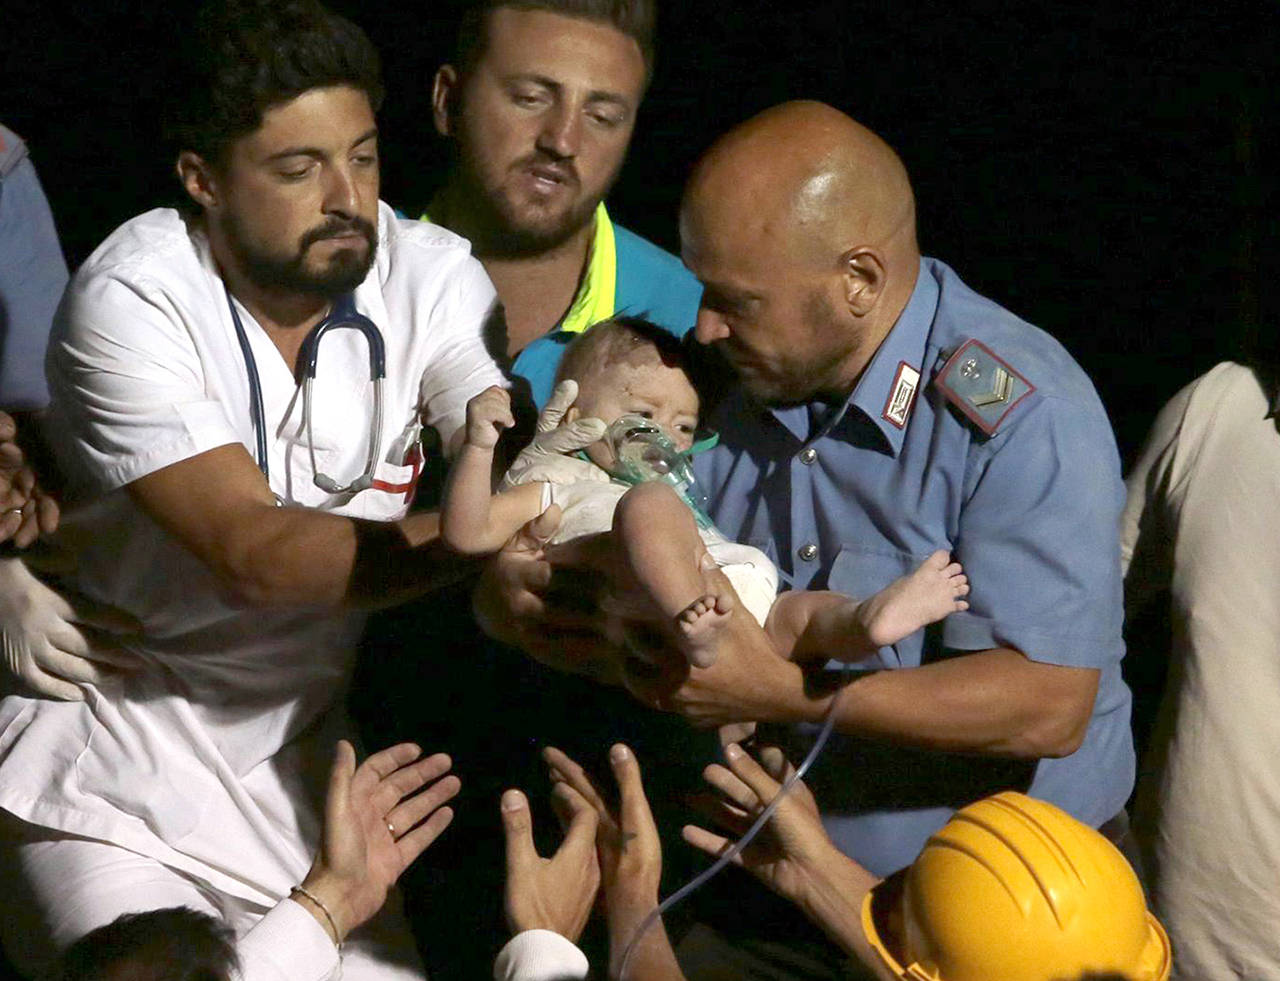 Rescuers pull out a 7-month-old boy, Pasquale, from the rubble of a collapsed building in Casamicciola, on the island of Ischia, near Naples, Italy, a day after a 4.0-magnitude quake hit the Italian resort island on Tuesday. (ANSA via AP)